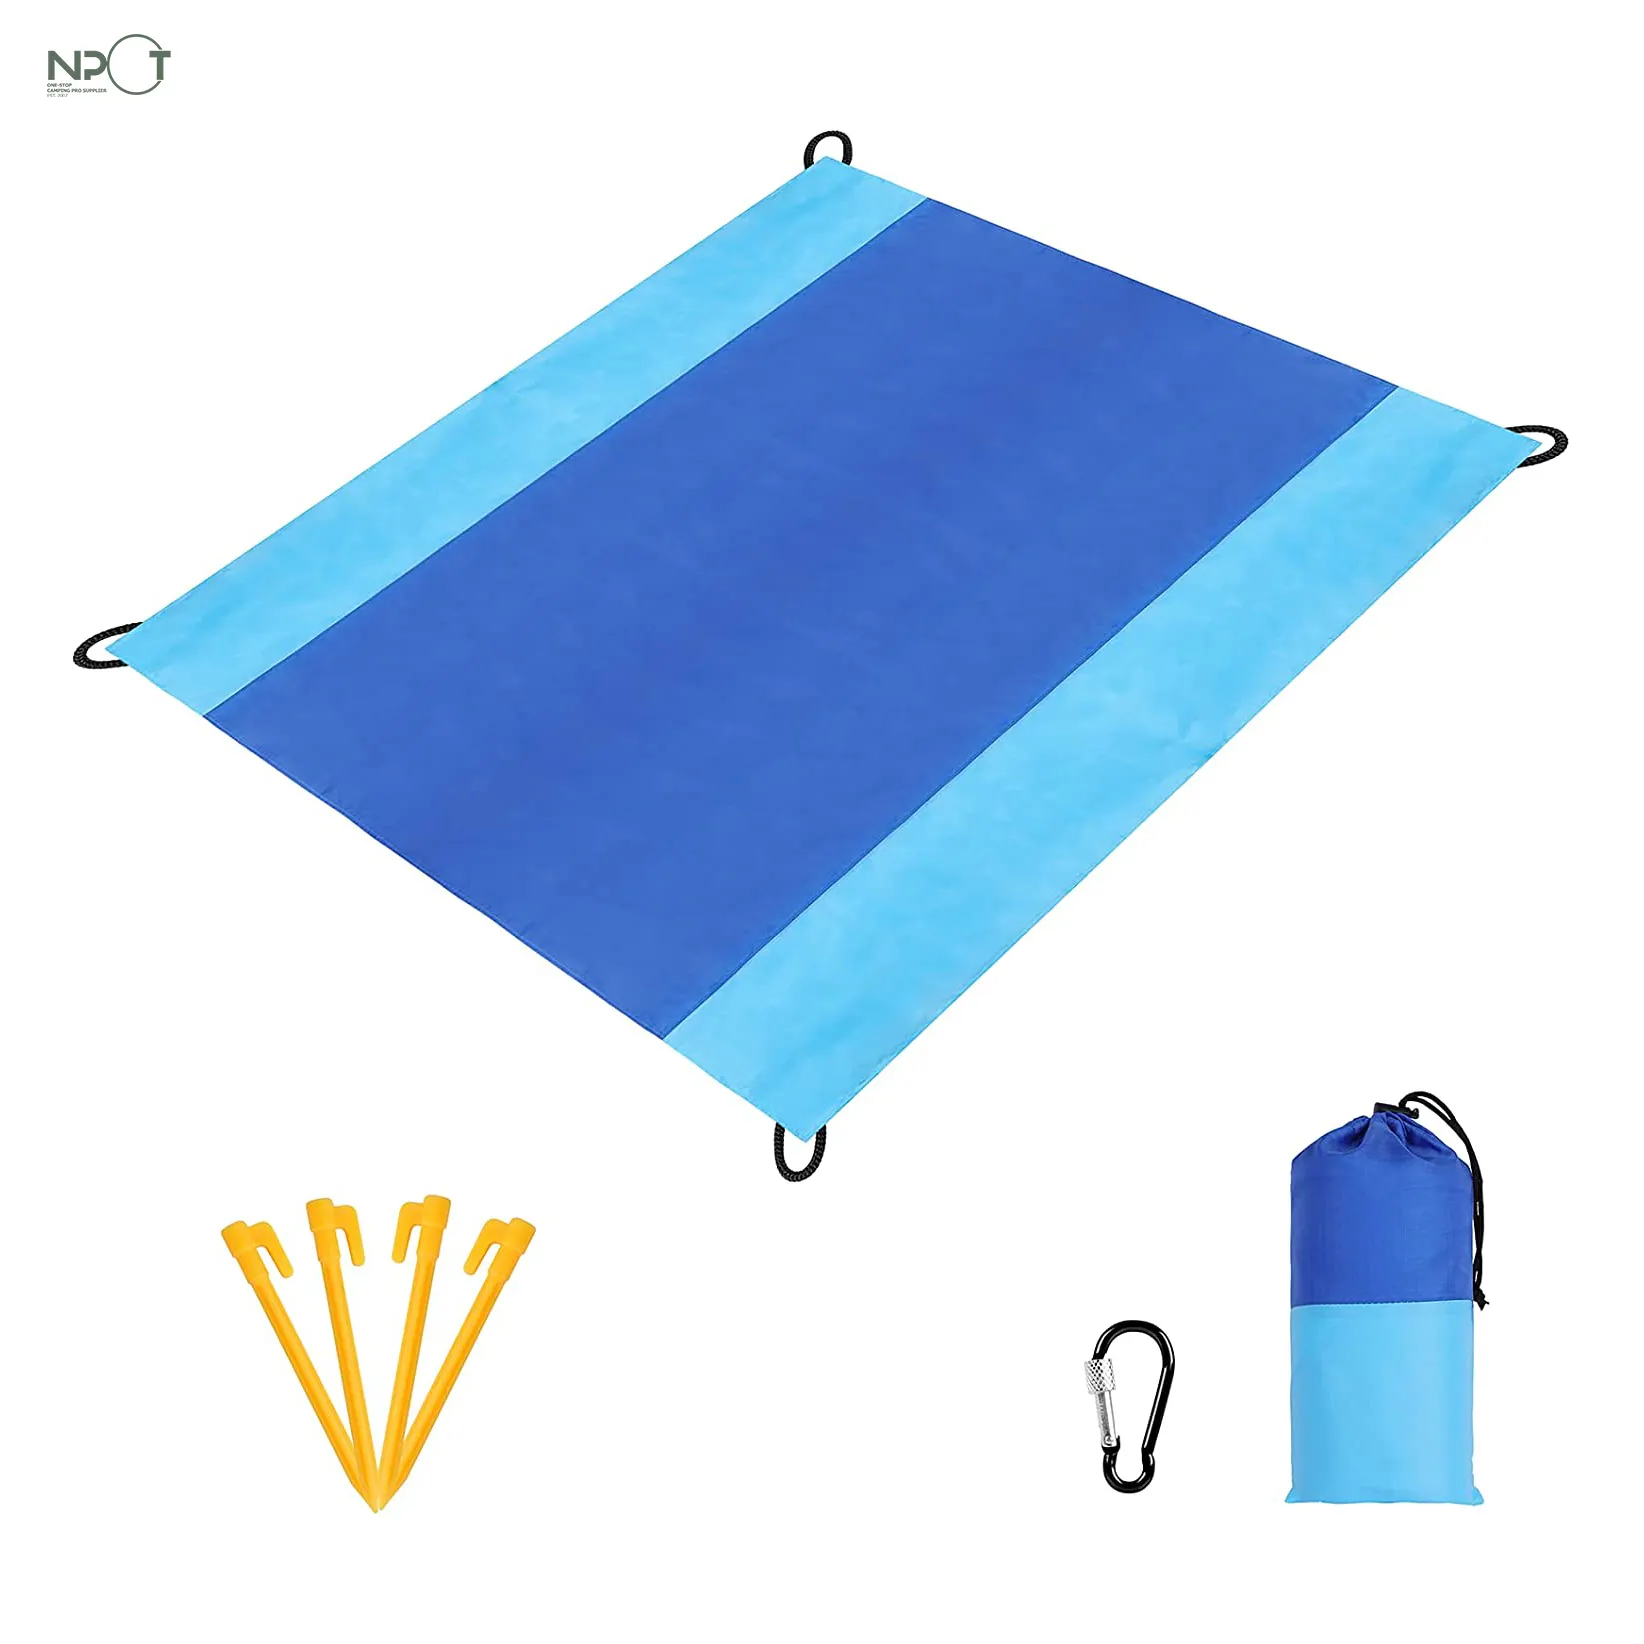 Hot new products Sand-proof beach blanket with 6 Stakes portable oversized waterproof picnic mat for travel